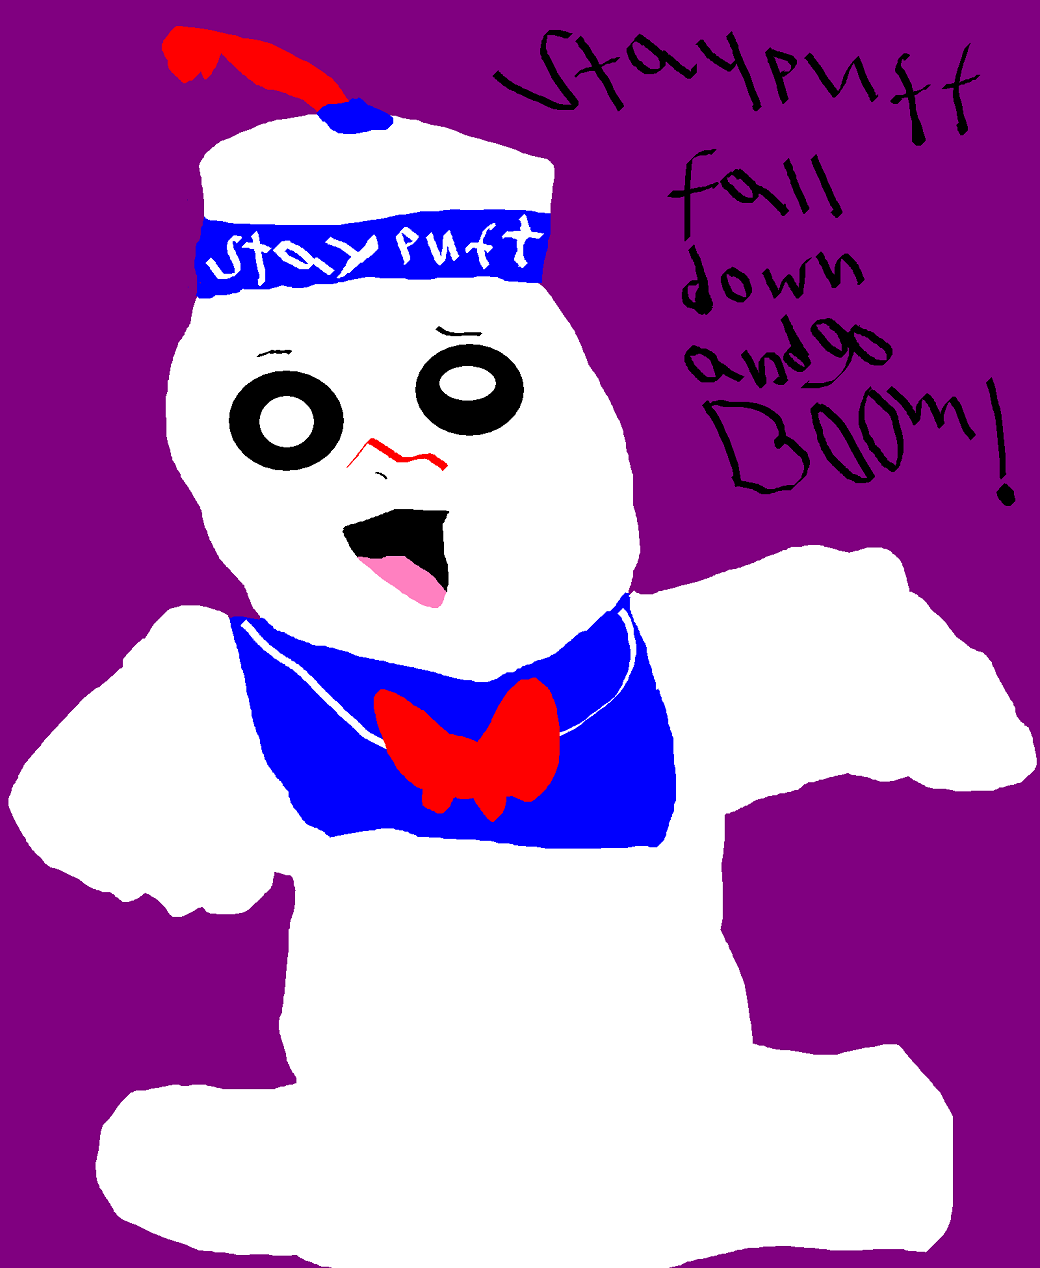 Staypuft Fall Down And Go Boom MS Paint by Falconlobo